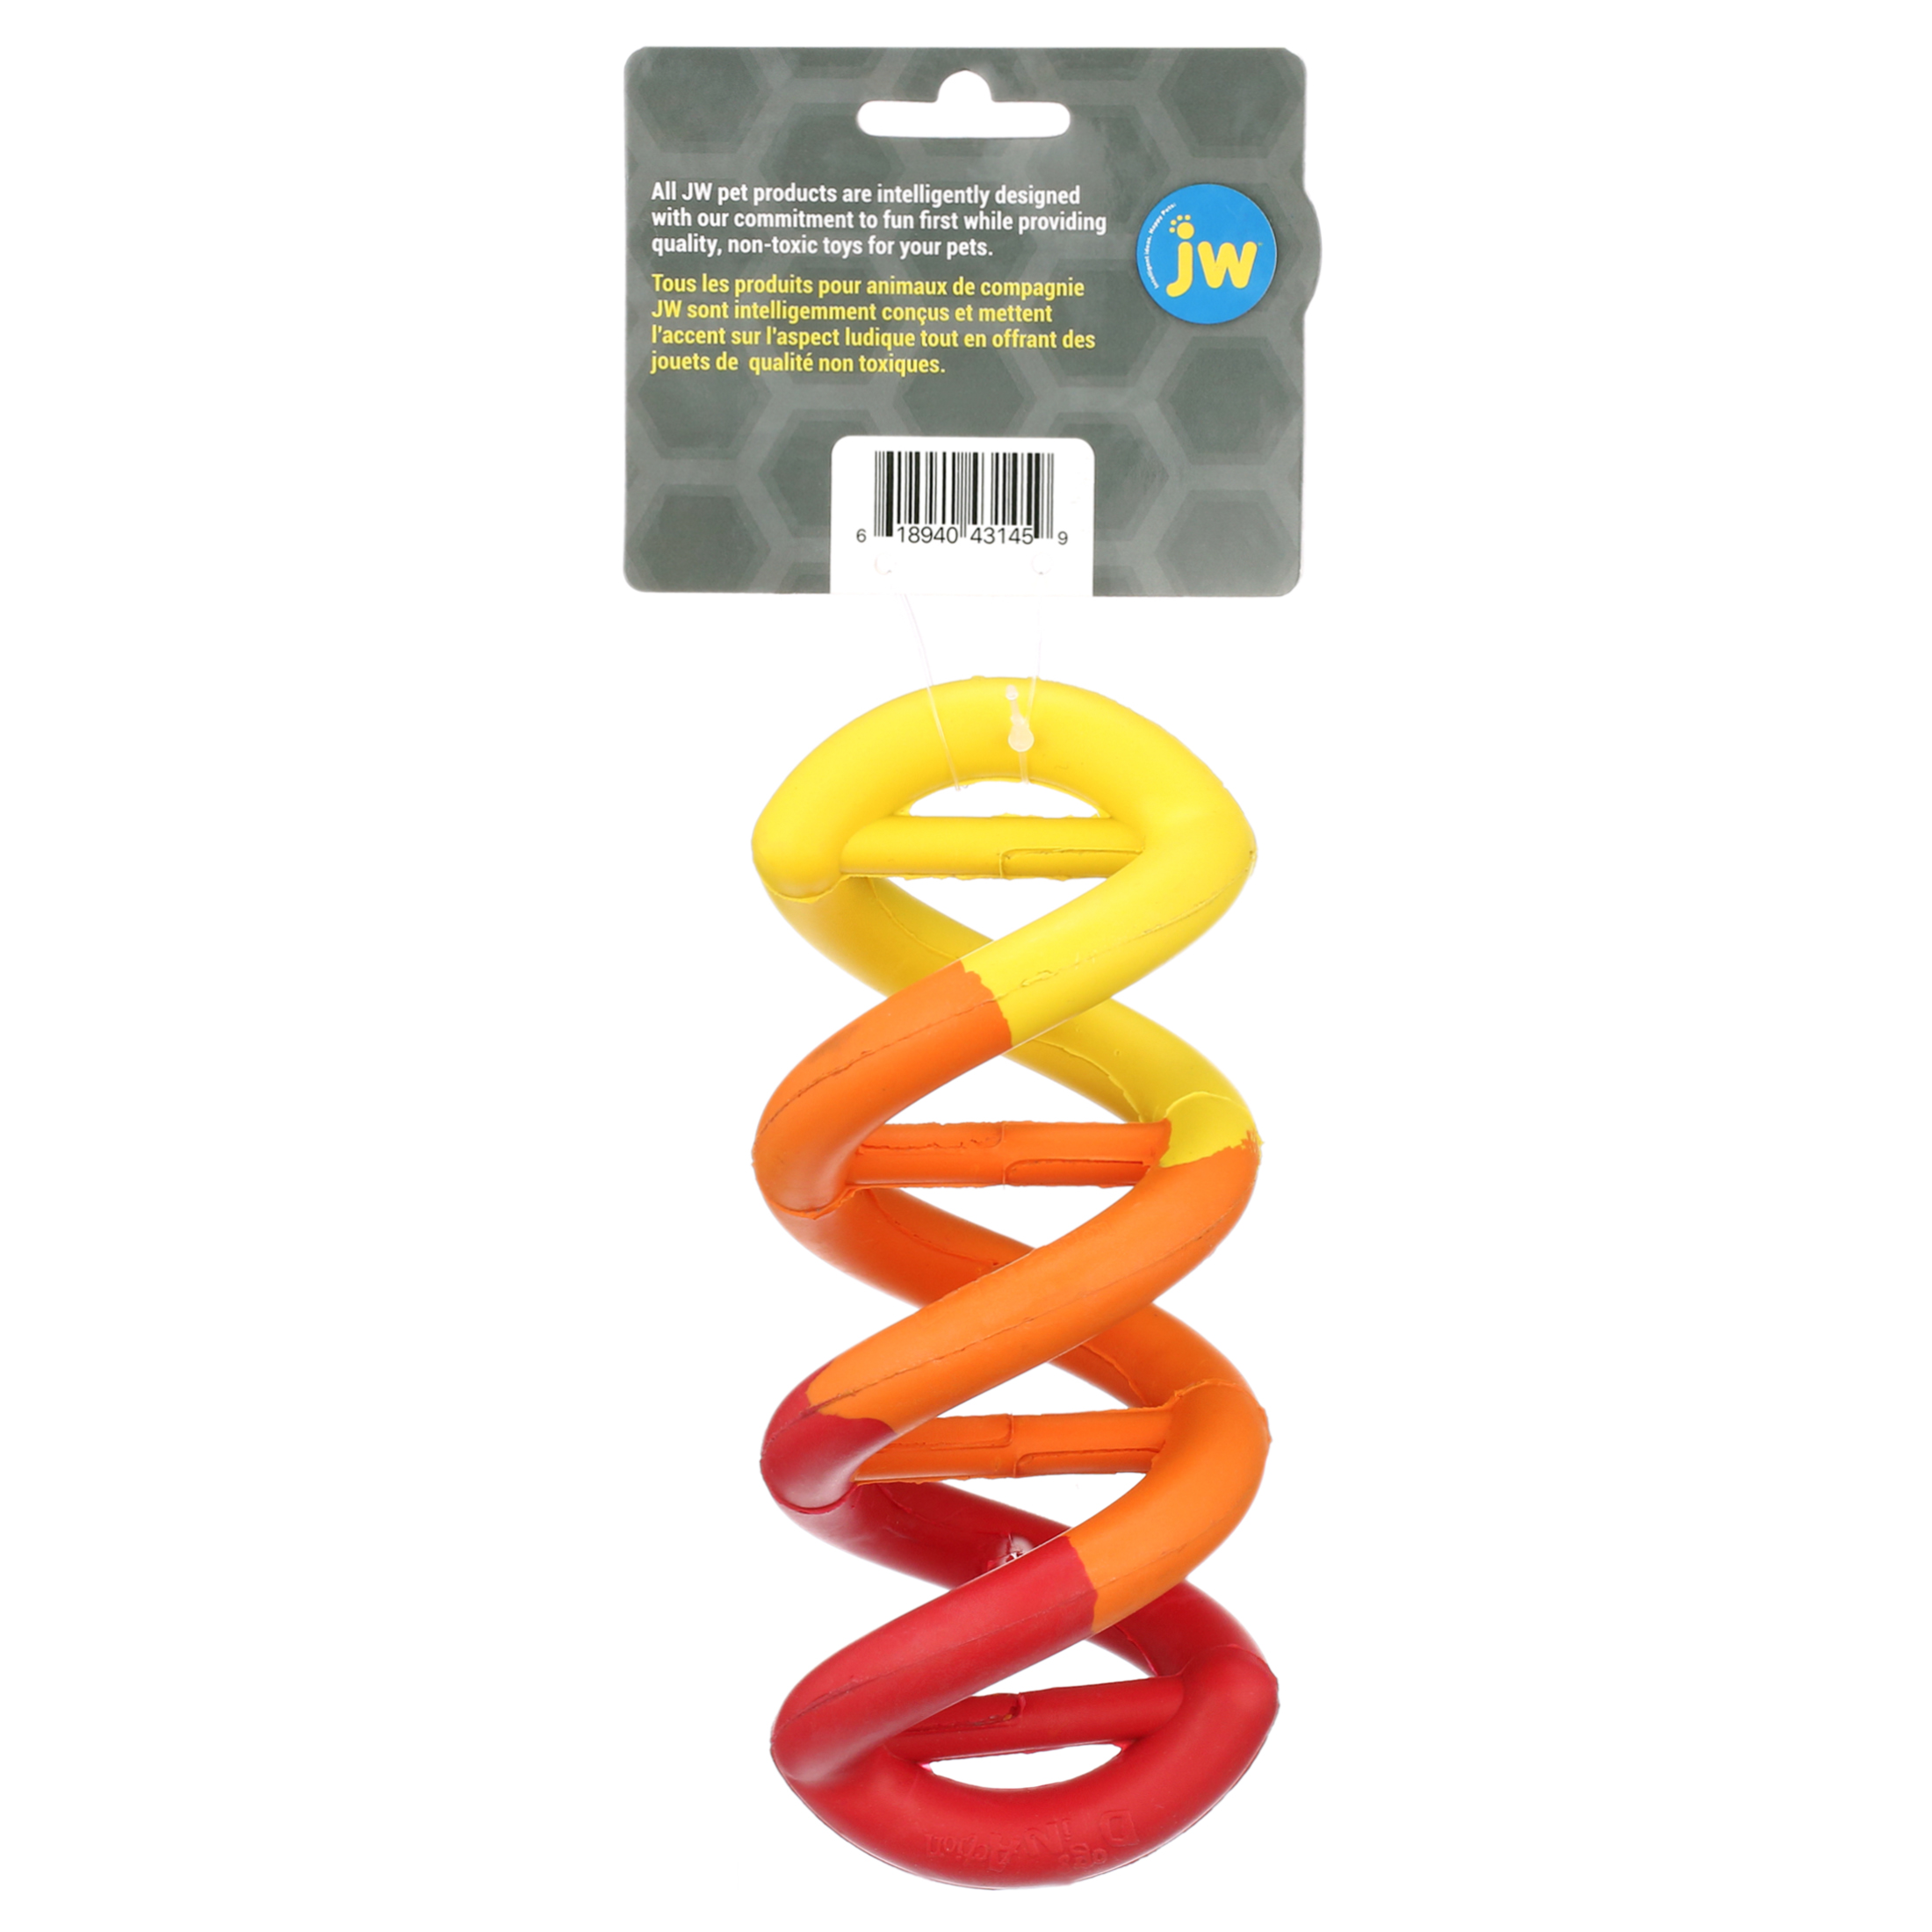 JW Dogs in Action Double Helix Shaped Rubber Chew and Tug Dog Toy, Multicolor, Large, Pack of 1 - image 4 of 5